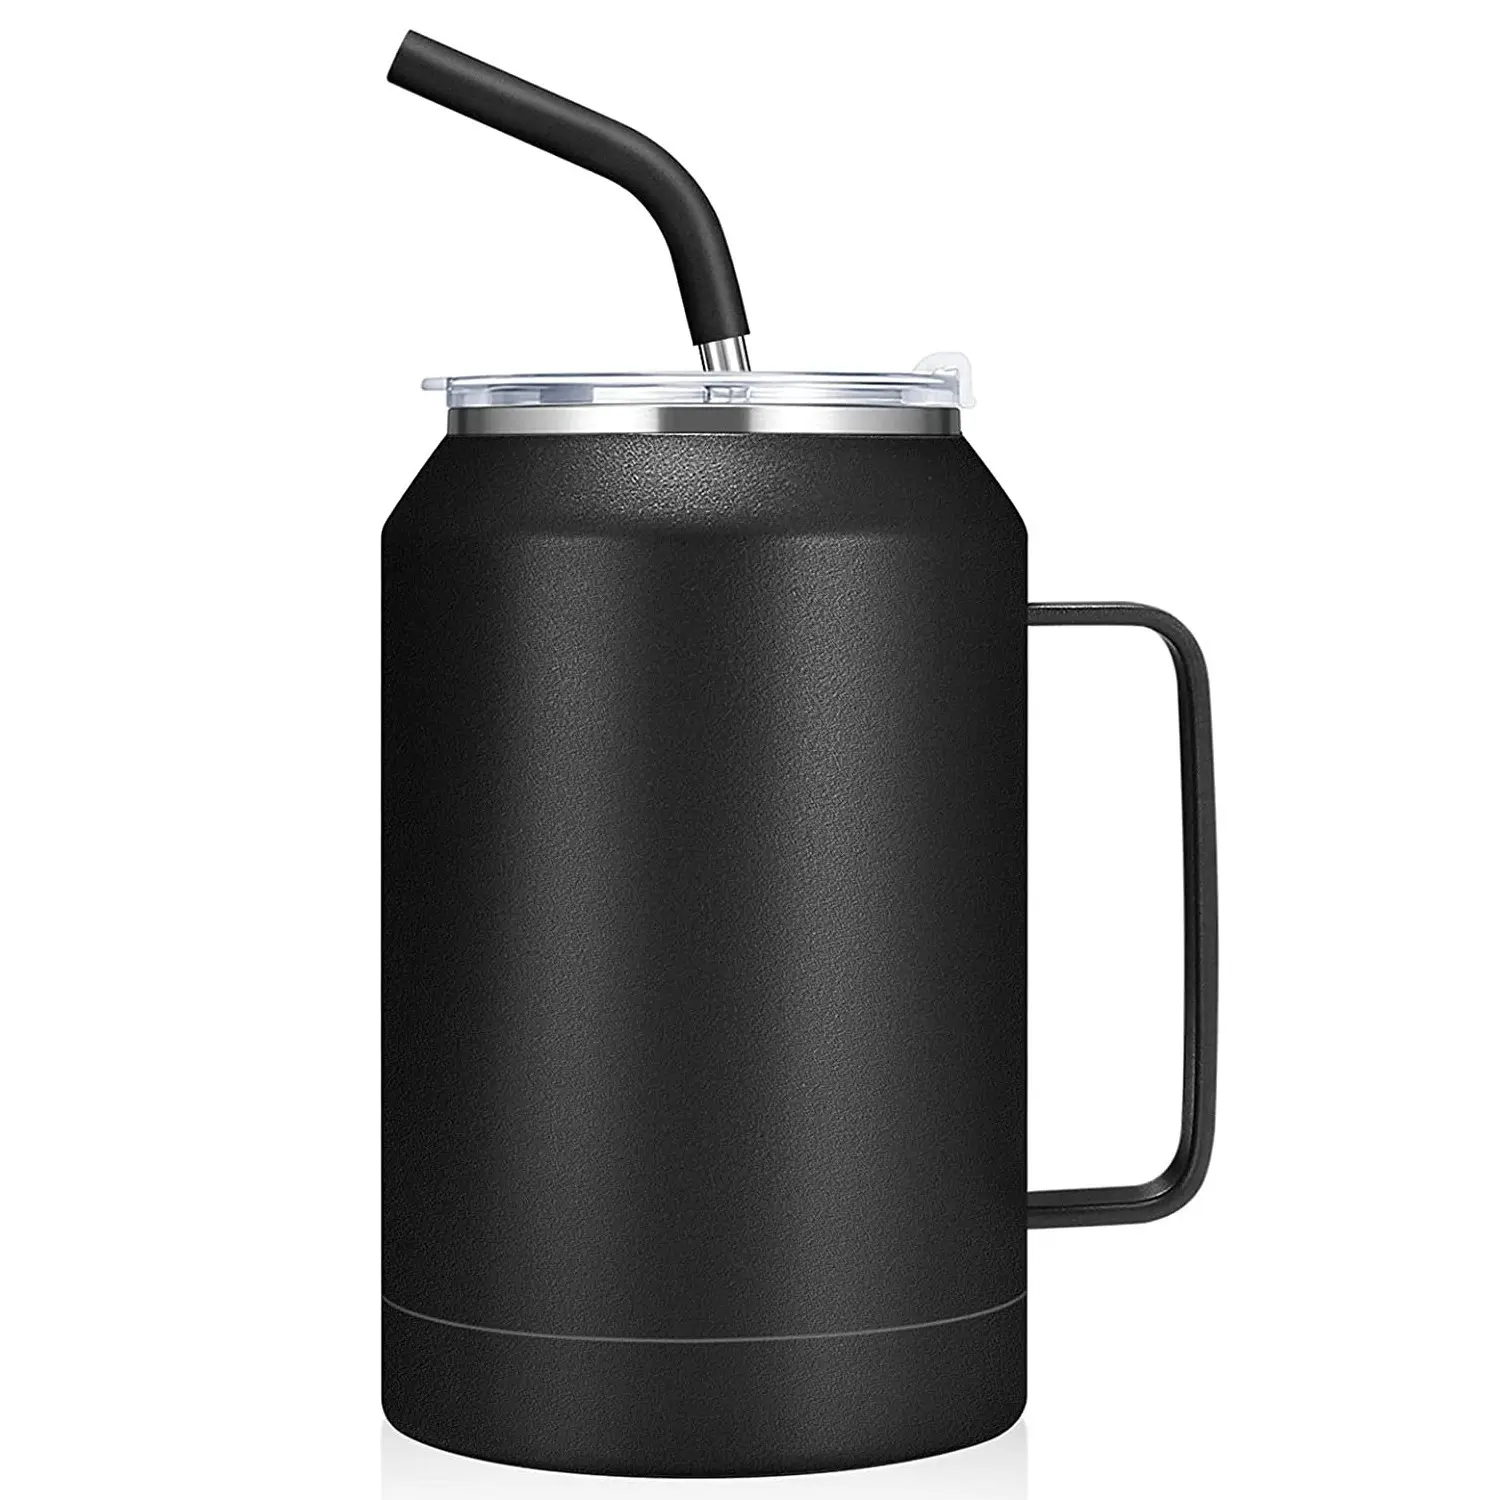 Mug stainless steel large capacity thermos cup Gradient car cup with handle Ice bully cup beer keg